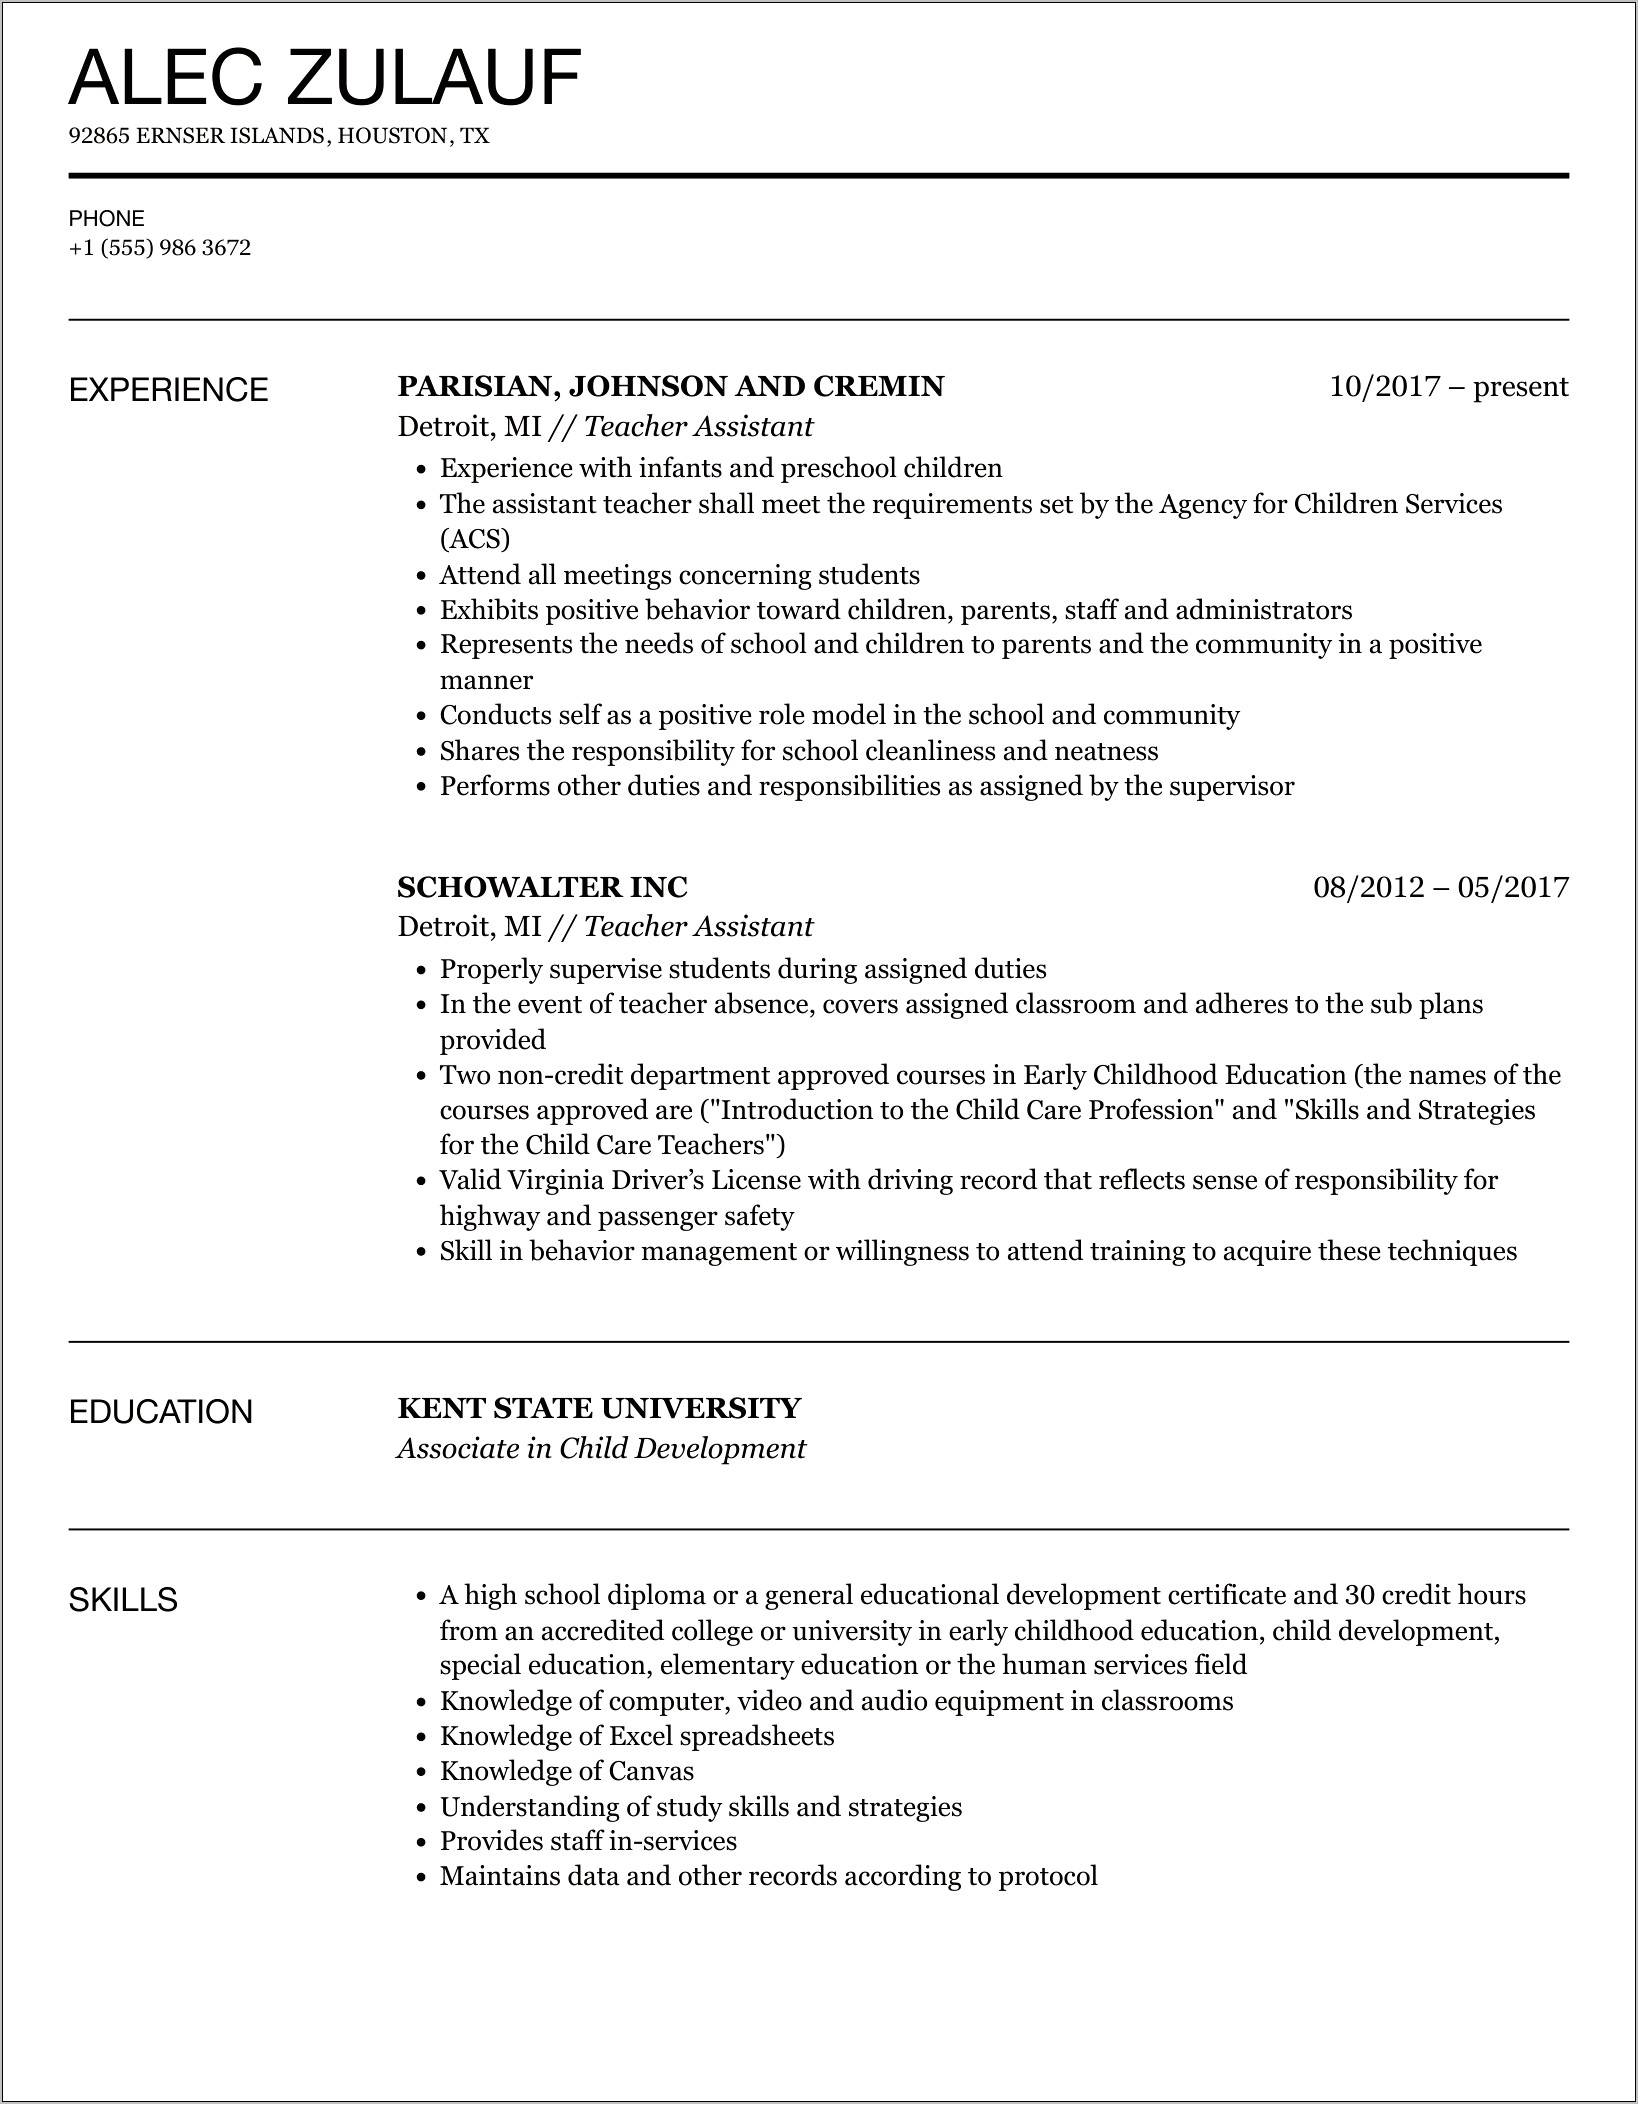 Teaching Assistant Experience Resume Sample